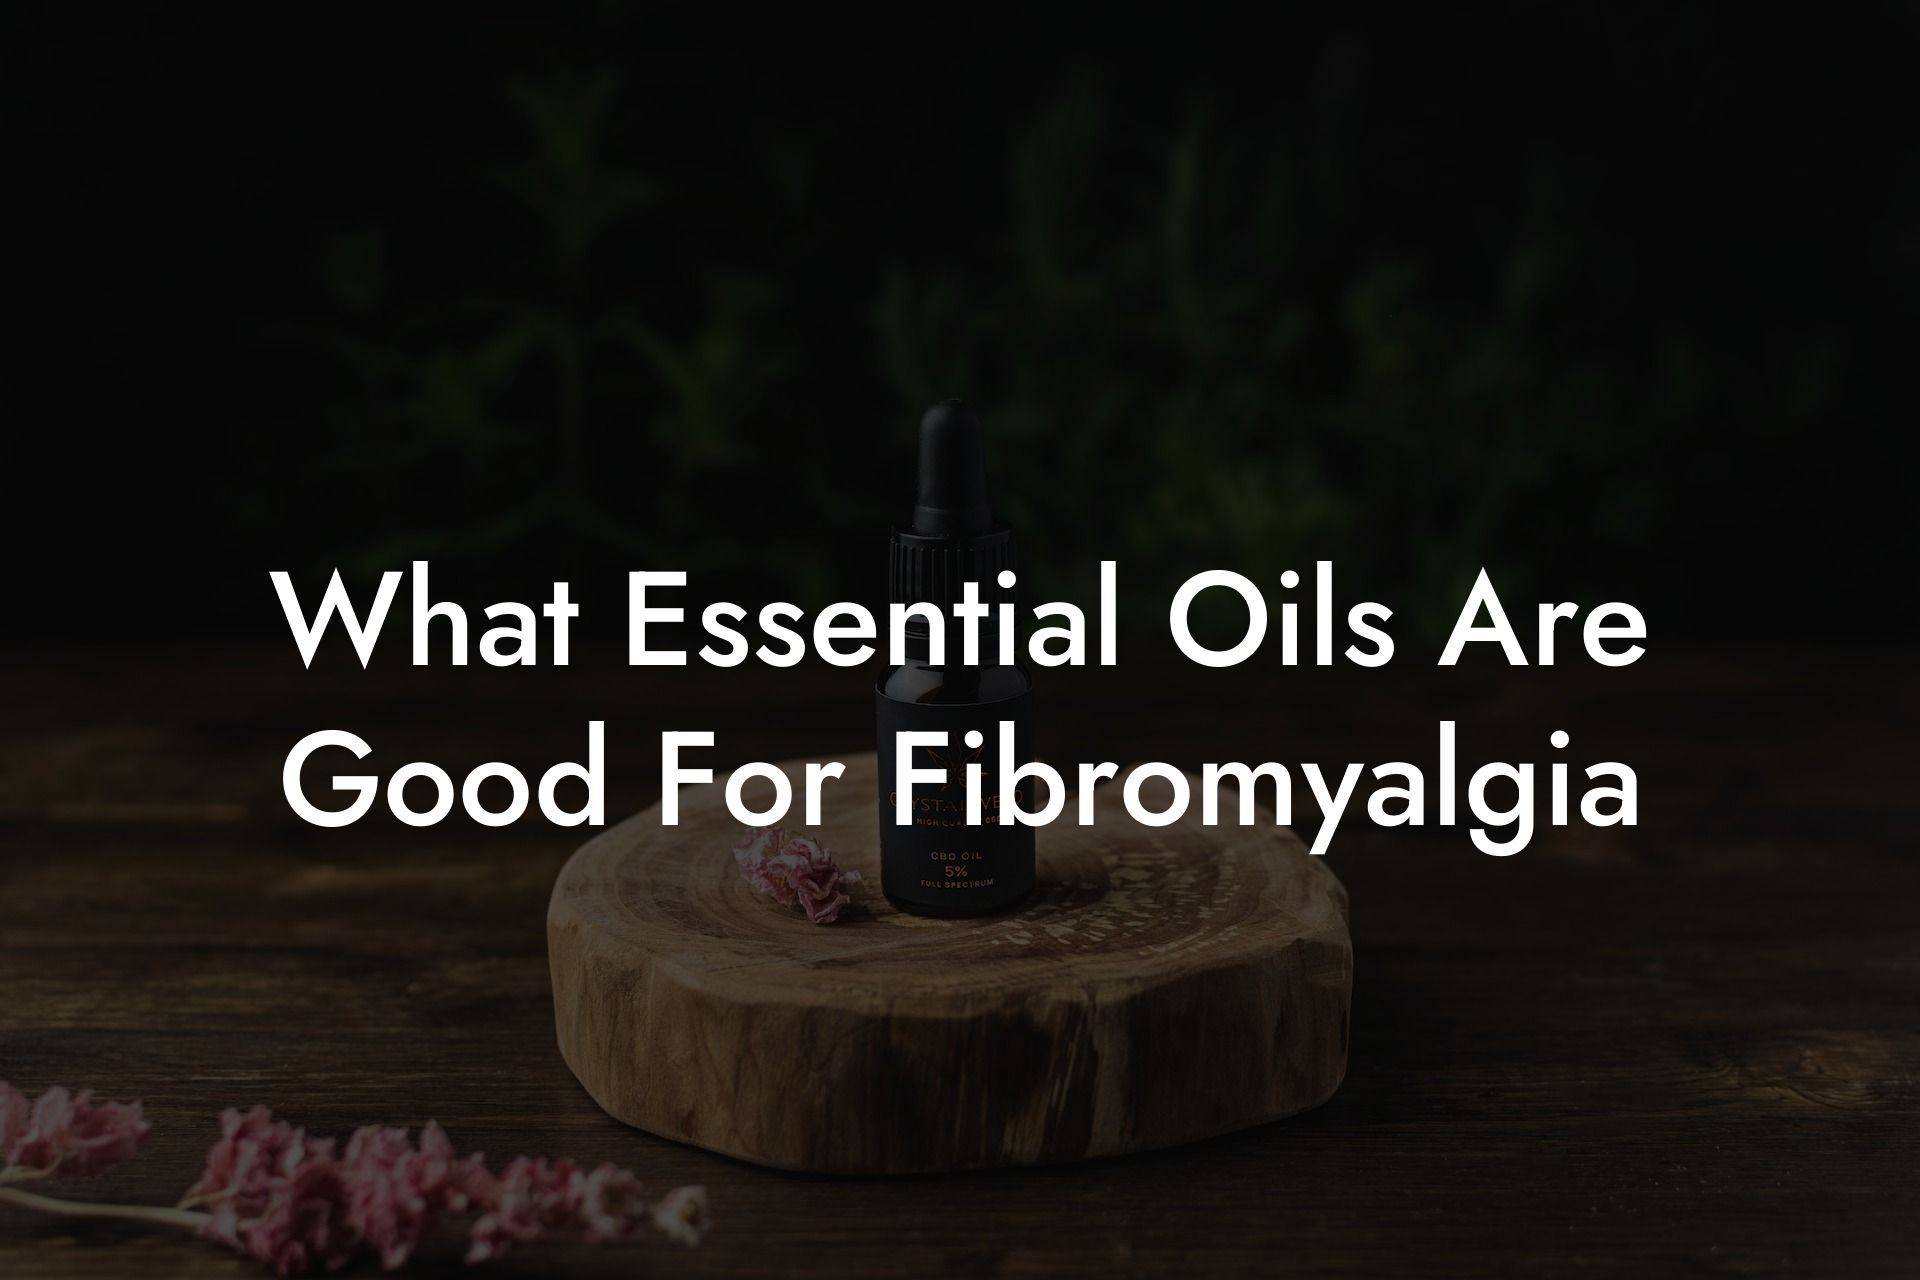 What Essential Oils Are Good For Fibromyalgia